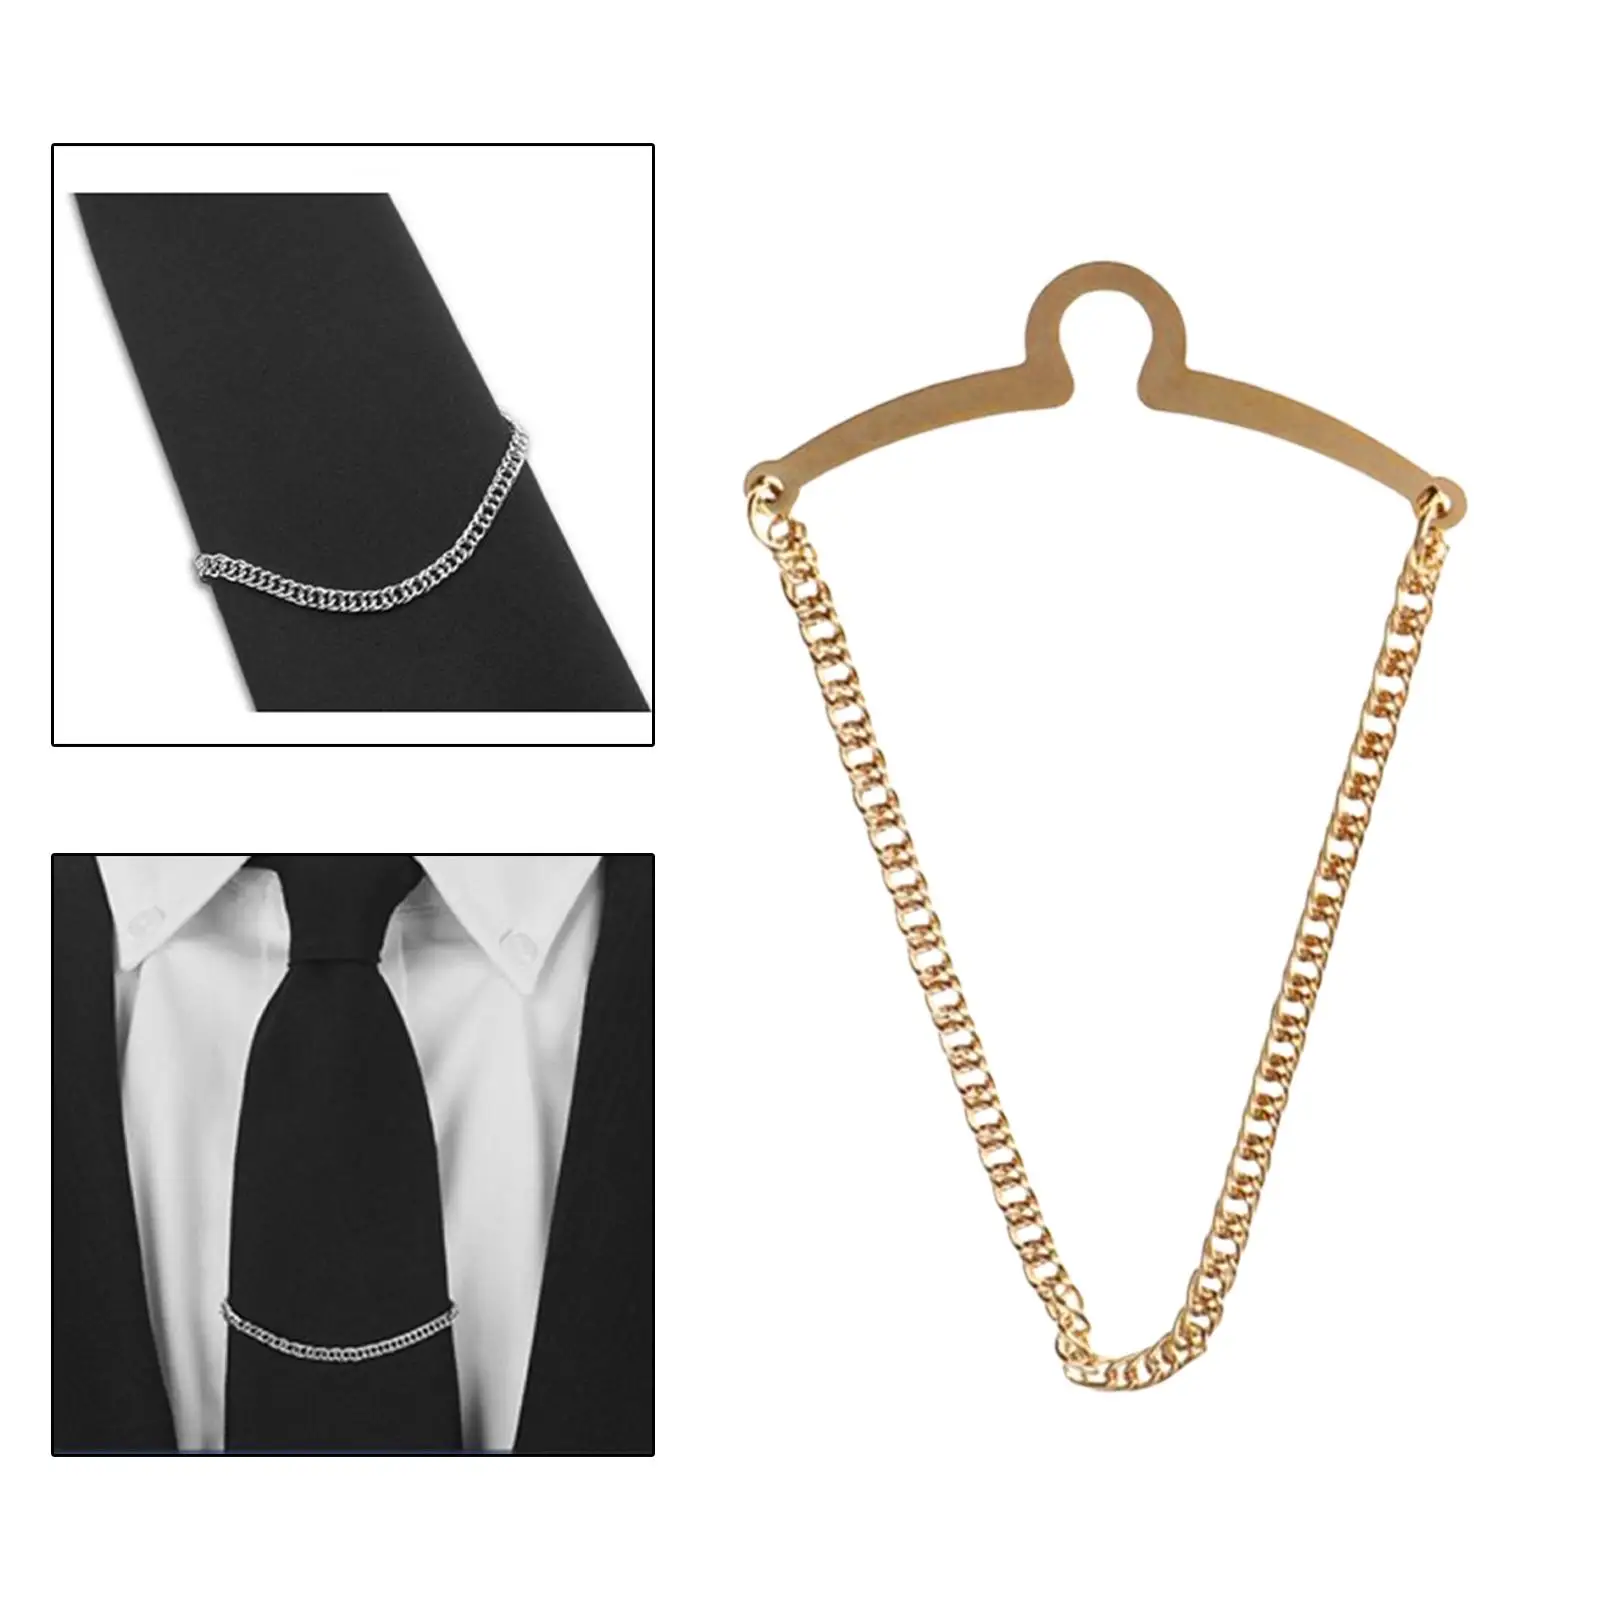 Men Tie Chain Button Attachment Tie Clips for Business Wedding Party Engagement Gift